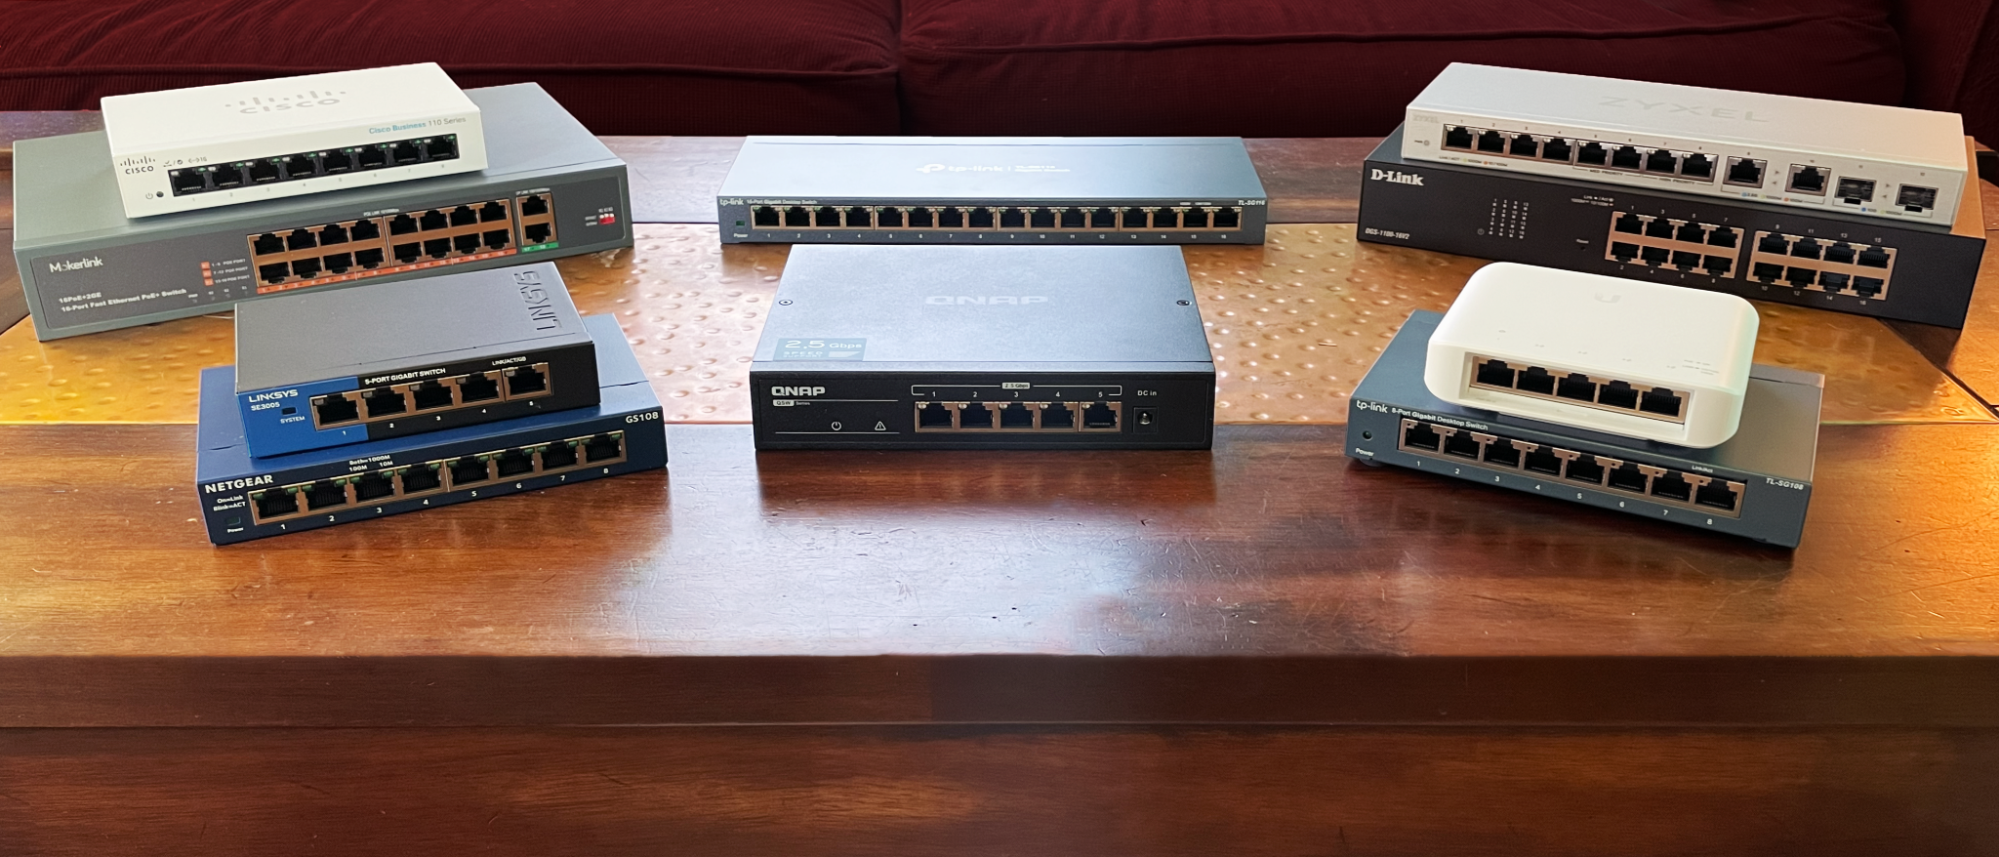 How to setup a network switch  Extend your LAN network in 5 easy